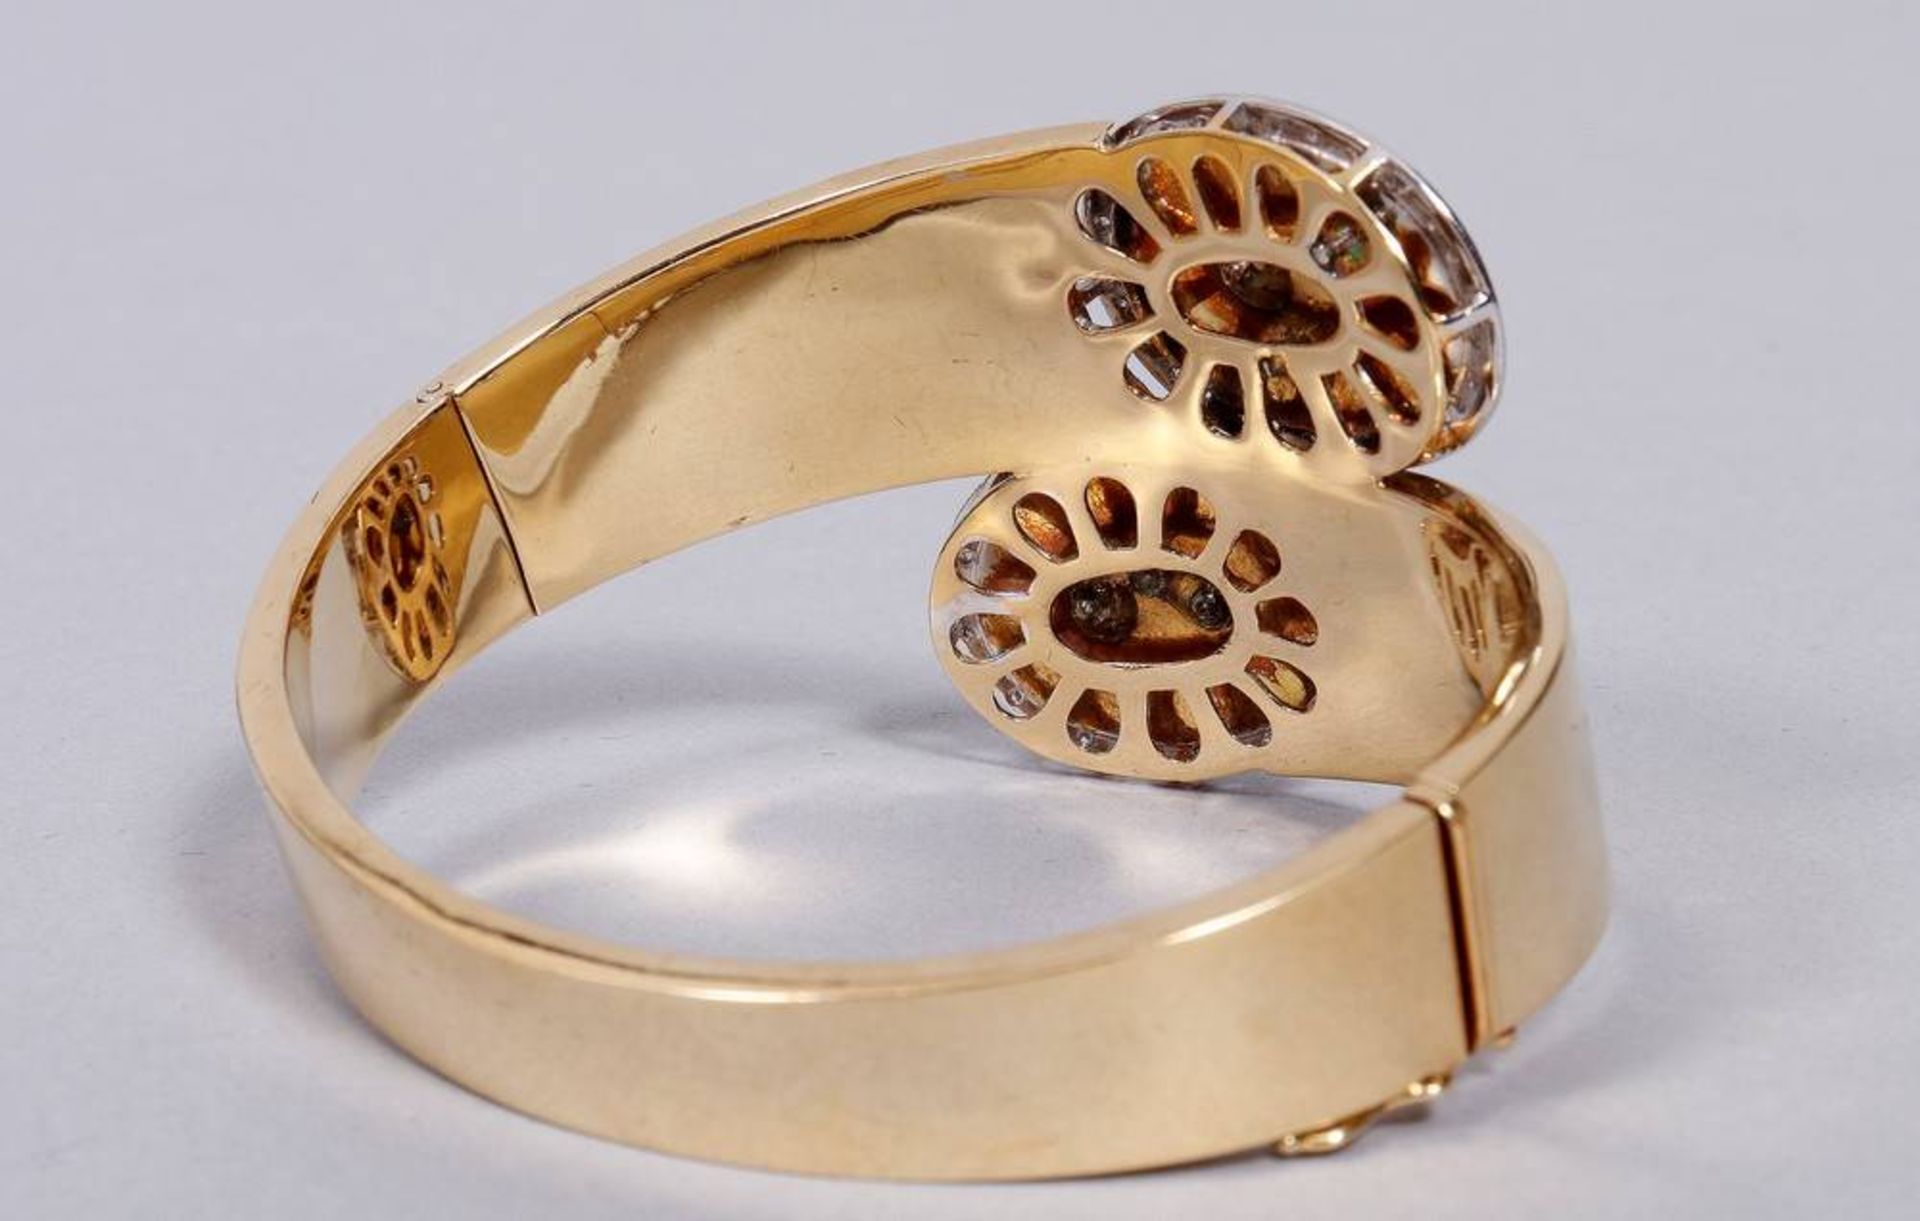 Bangle with jade and diamonds, 750 gold, one-off production - Image 3 of 3